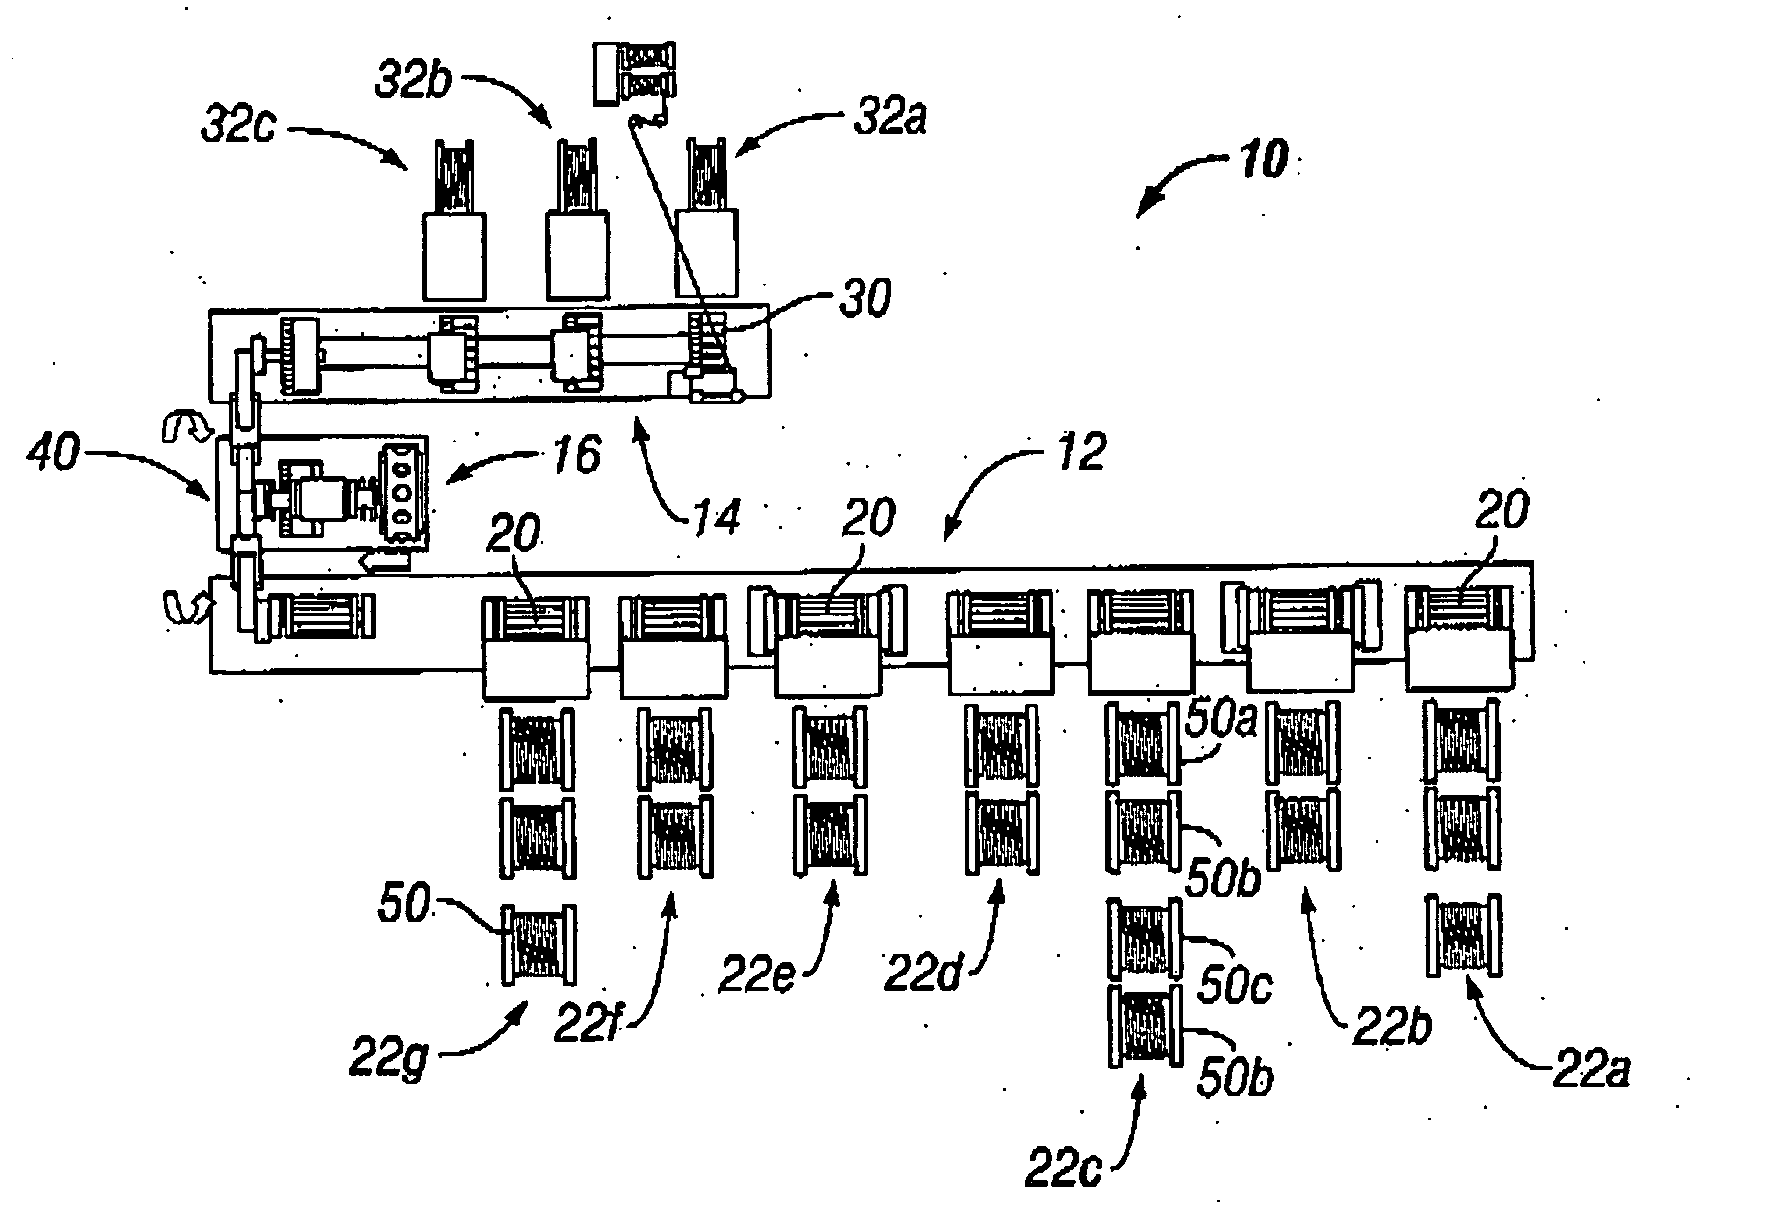 Methods and apparatus for making tires and for converting an assembly line for making different types of tires